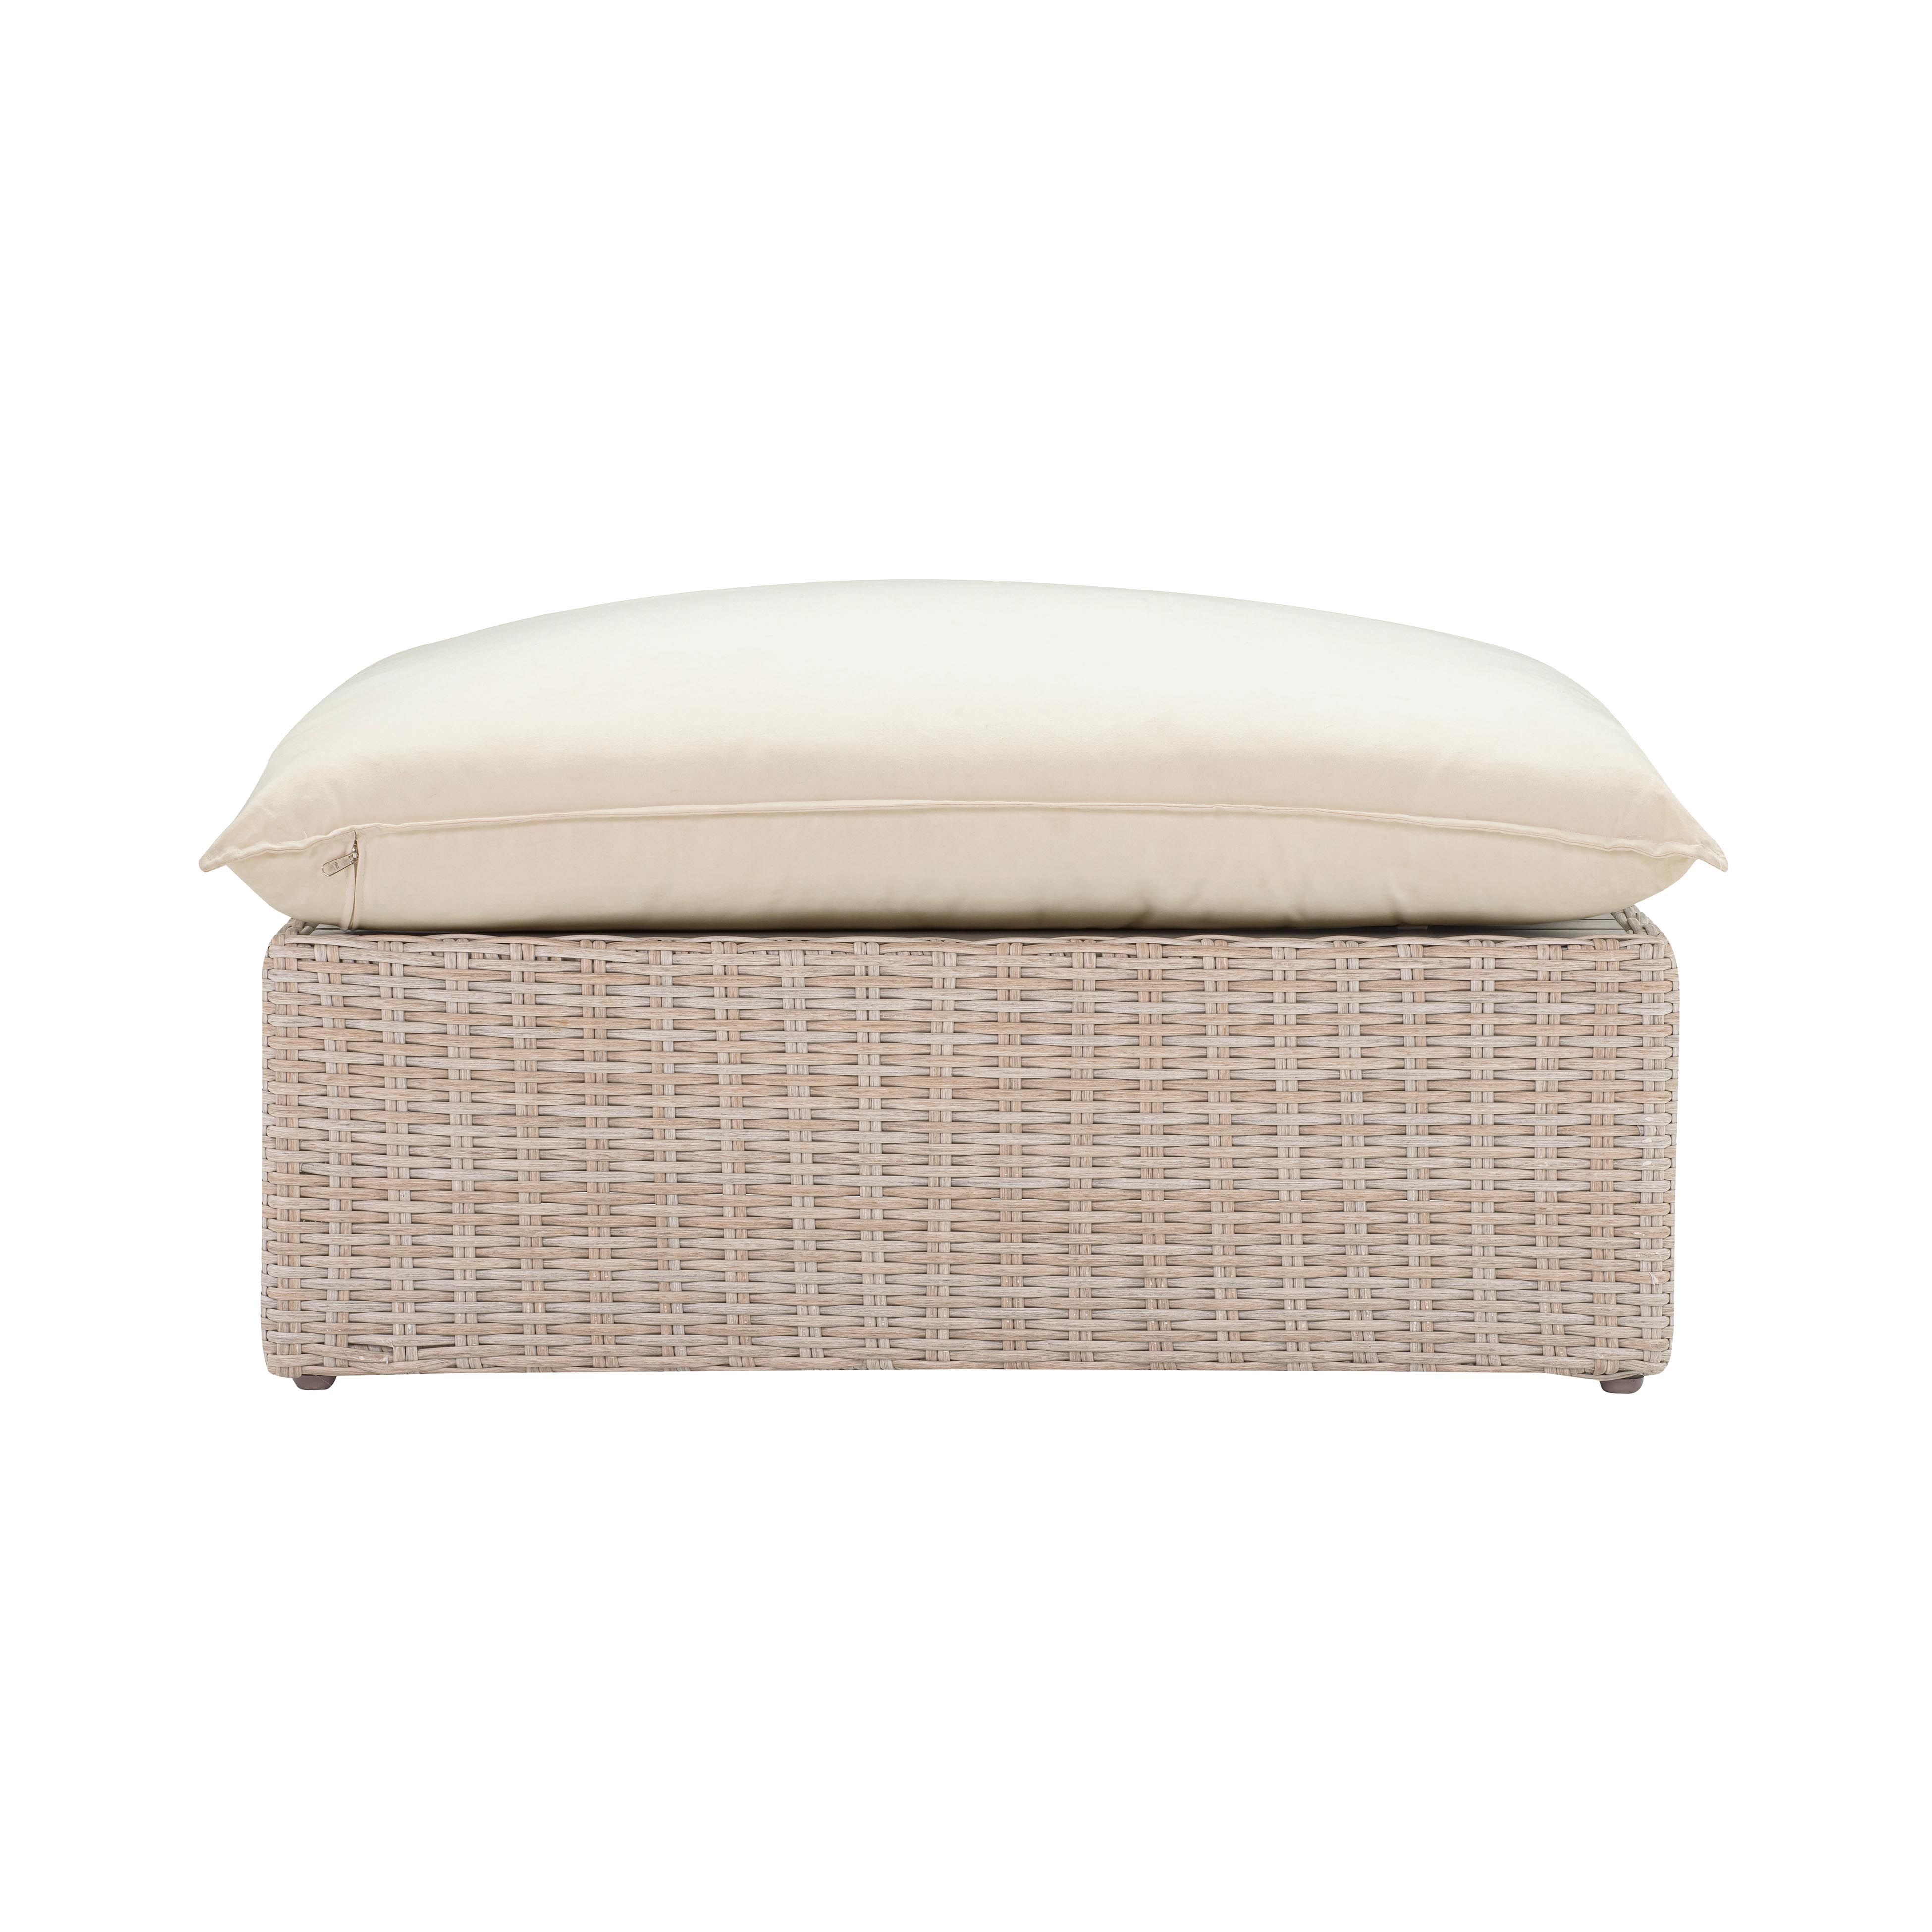 Cali Natural Wicker Outdoor Ottoman - Image 3